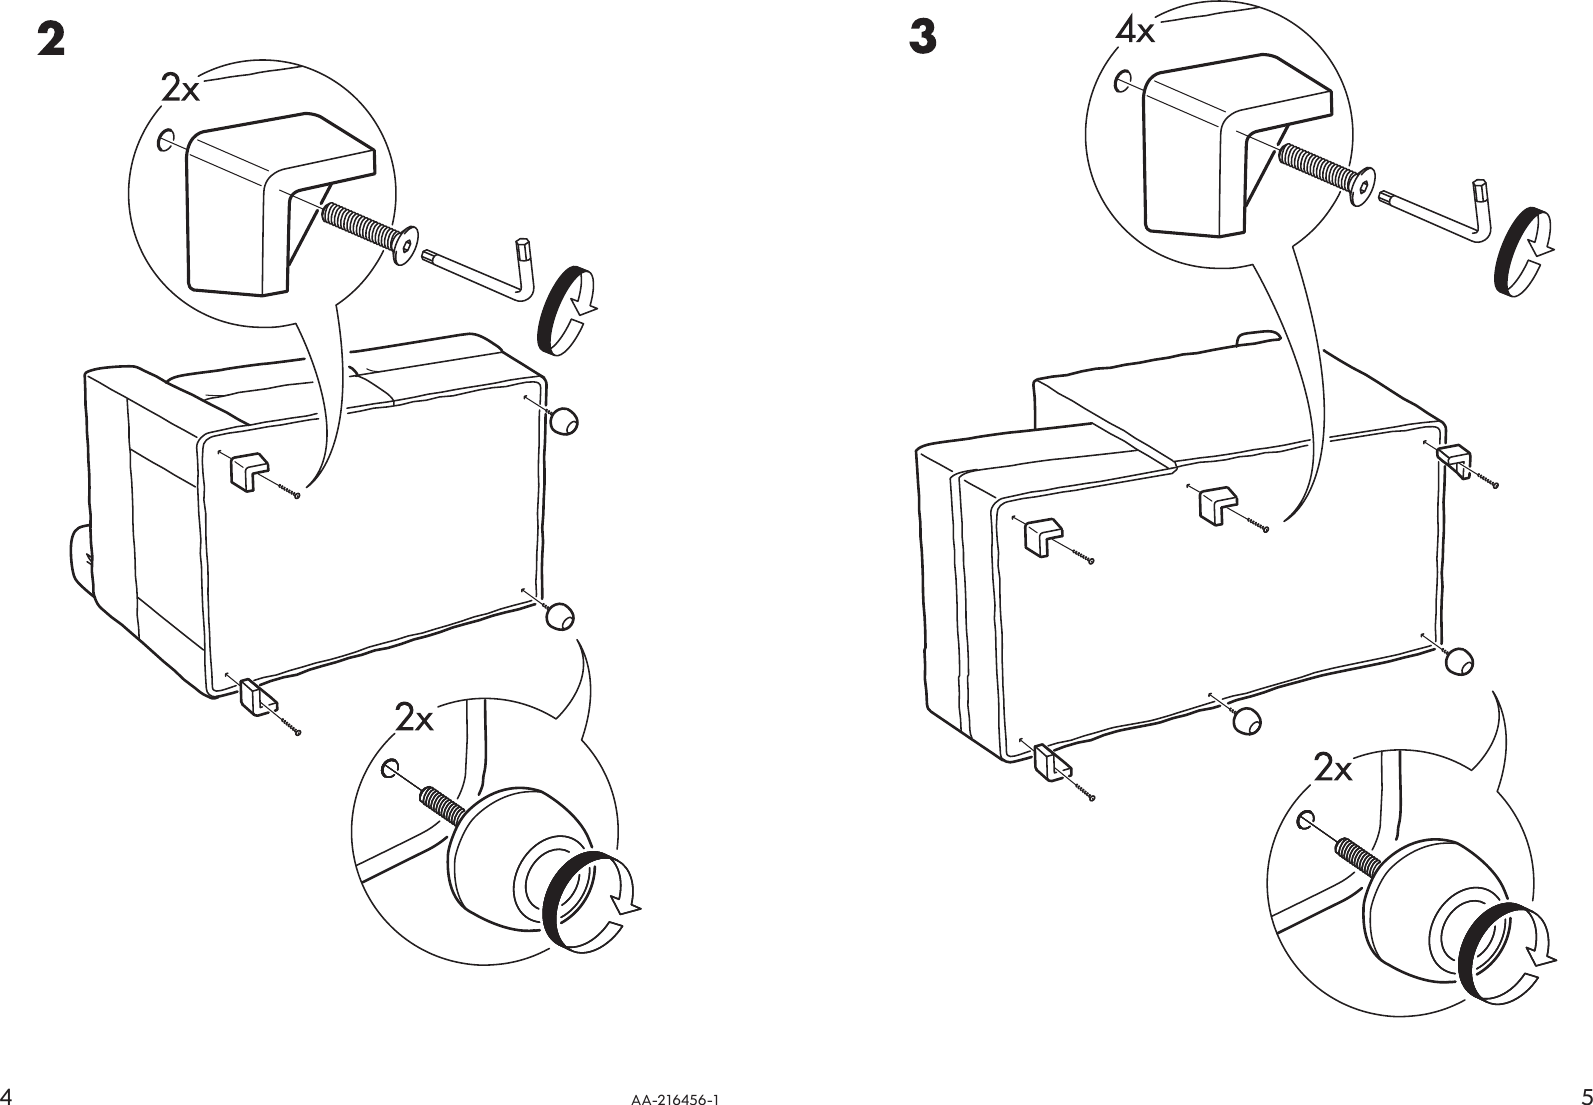 Page 4 of 4 - Ikea Ikea-Torekov-Left-Chaise-Assembly-Instruction